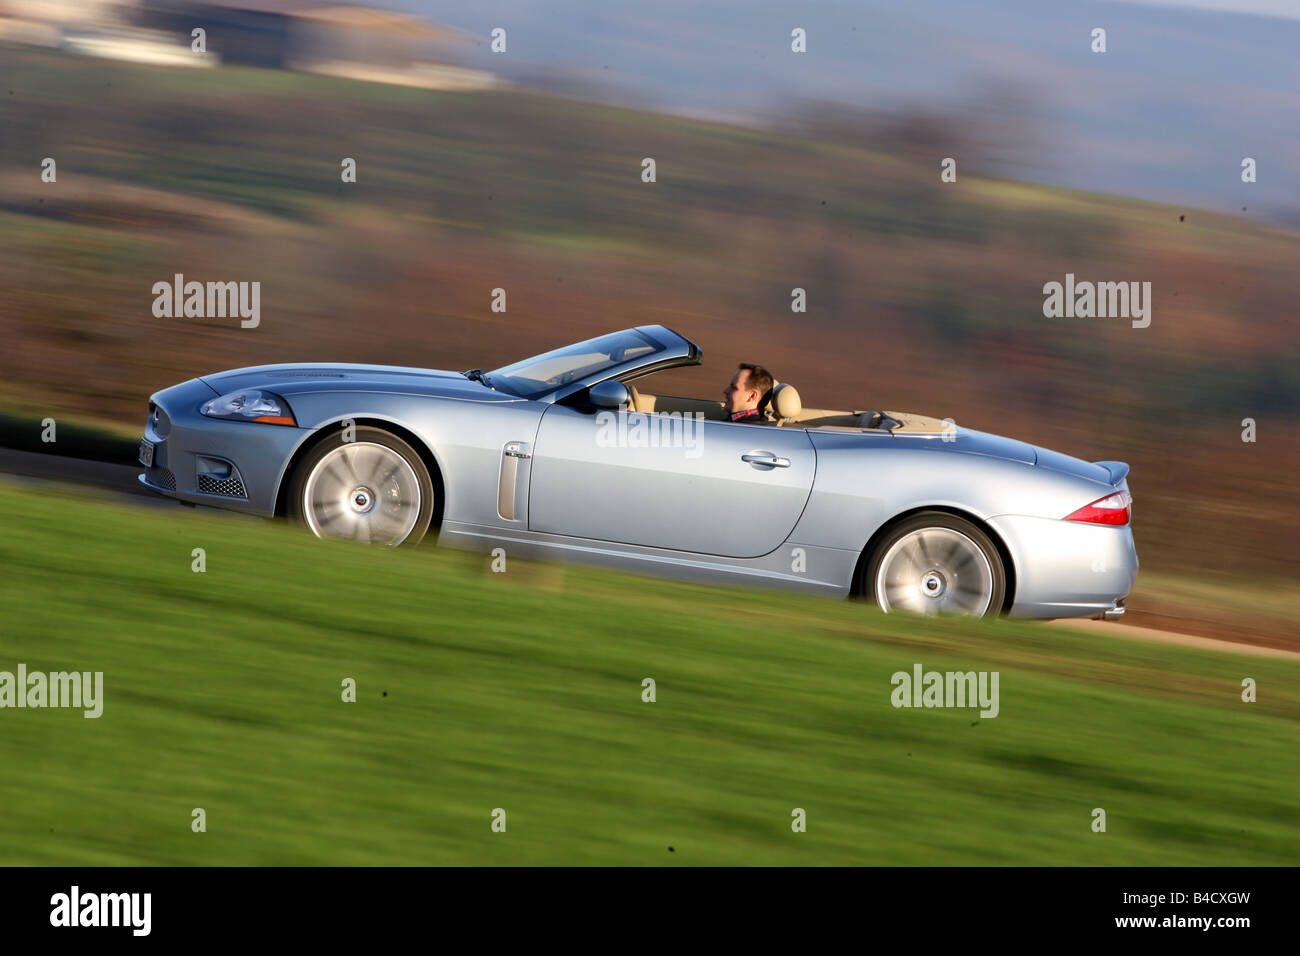 Jaguar XKR Convertible, model year 2006-, silver, driving, side view, country road, open top Stock Photo